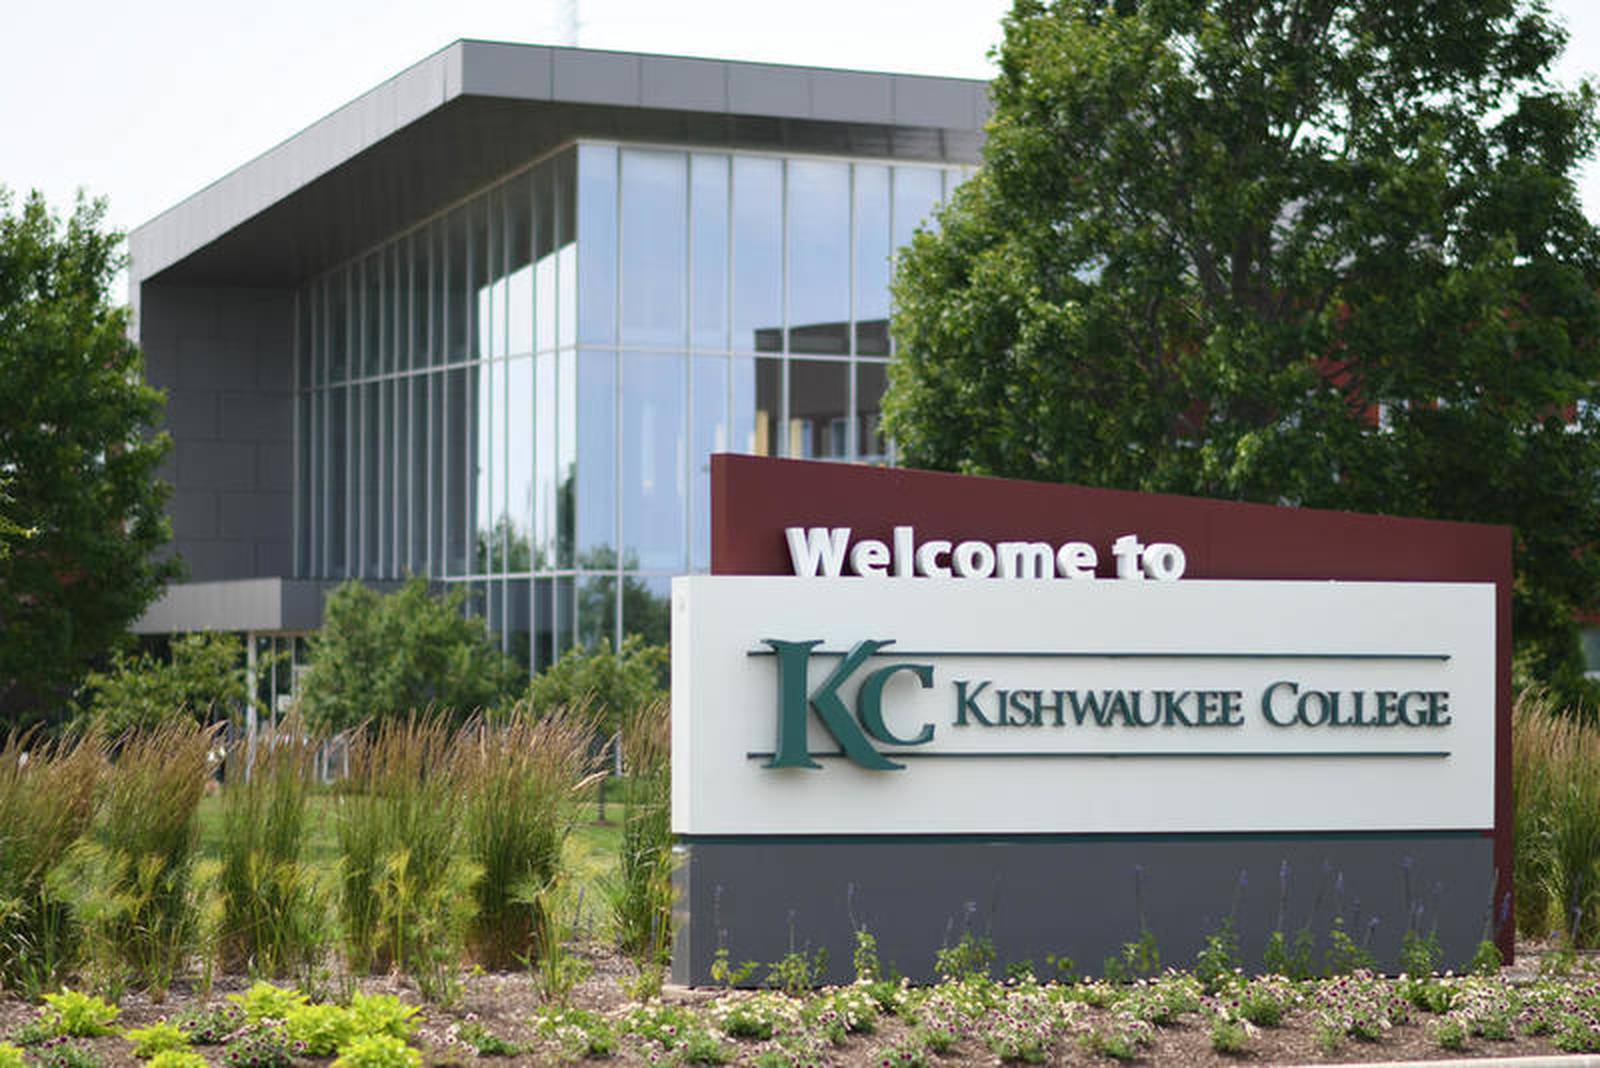 Kishwaukee College 10-day fall enrollment down 14% compared to 2019 due